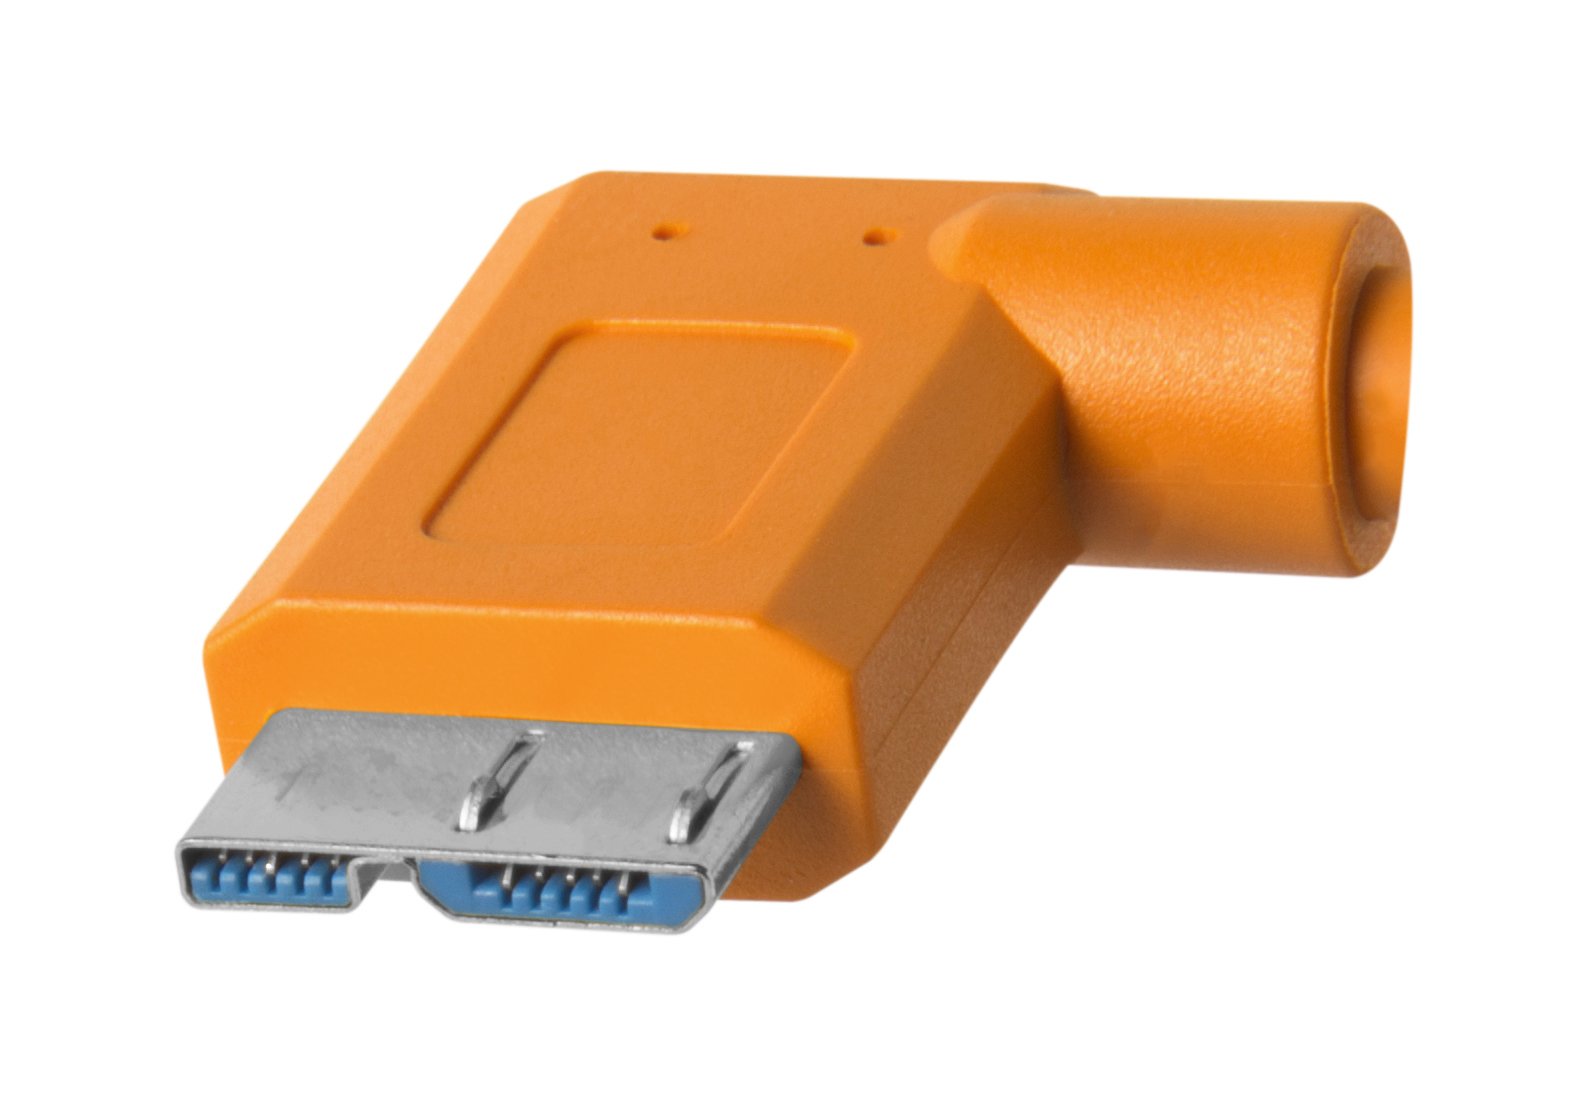 Tether Tools TetherPro USB-C to USB 3.0 Micro-B Right Angle Cable | for Fast Transfer and Connection Between Camera and Computer | High Visibility Orange | 15 Feet (4.6 m)